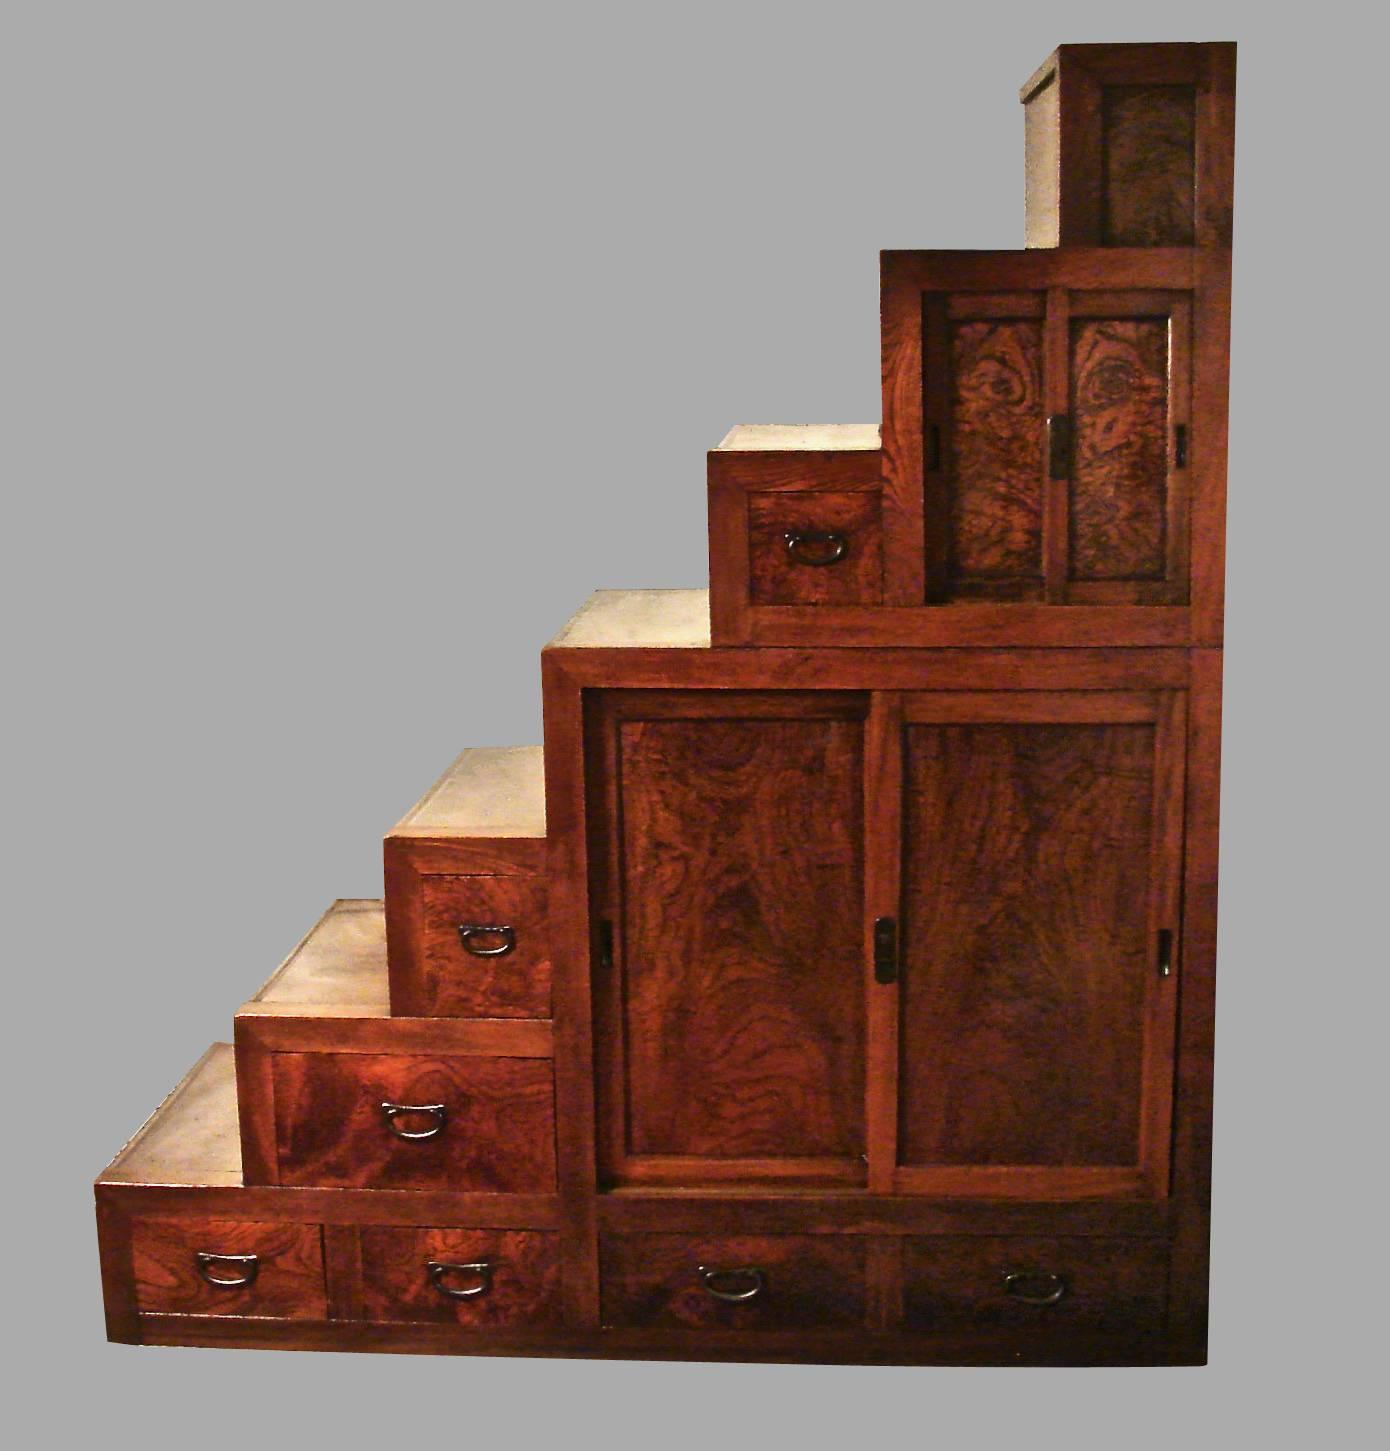 A good quality late Meiji period Japanese keyaki wood kaidan or step tansu in two parts, the small three step upper stage with two sliding doors and a single small drawer, the large lower stage with four steps, two sliding doors and six drawers of